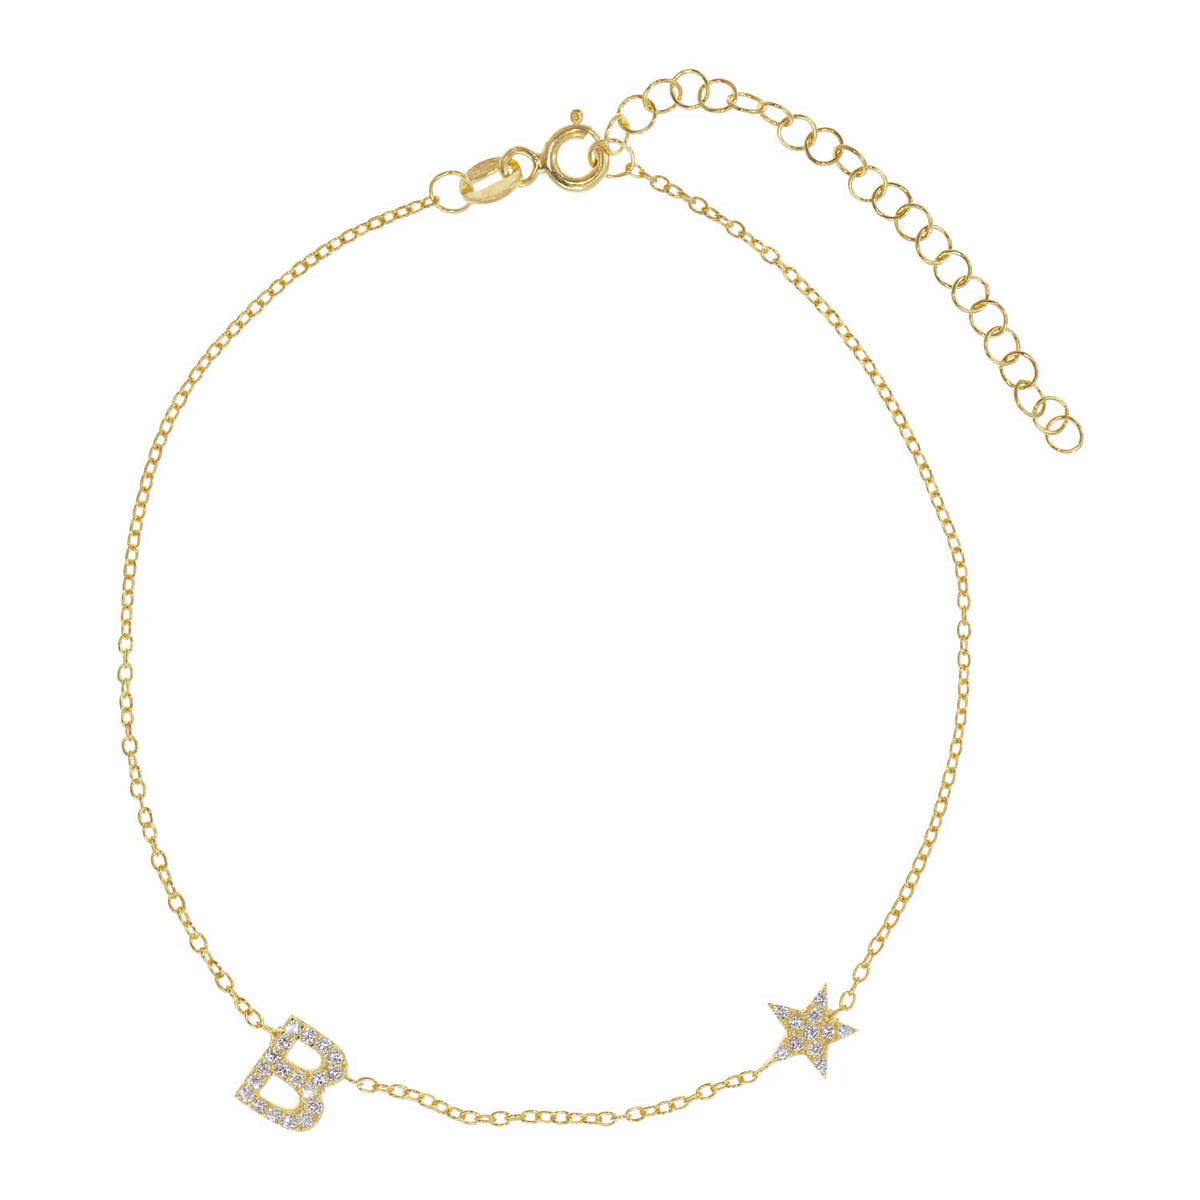 You're A Star Initial Anklet in Crystal Clear